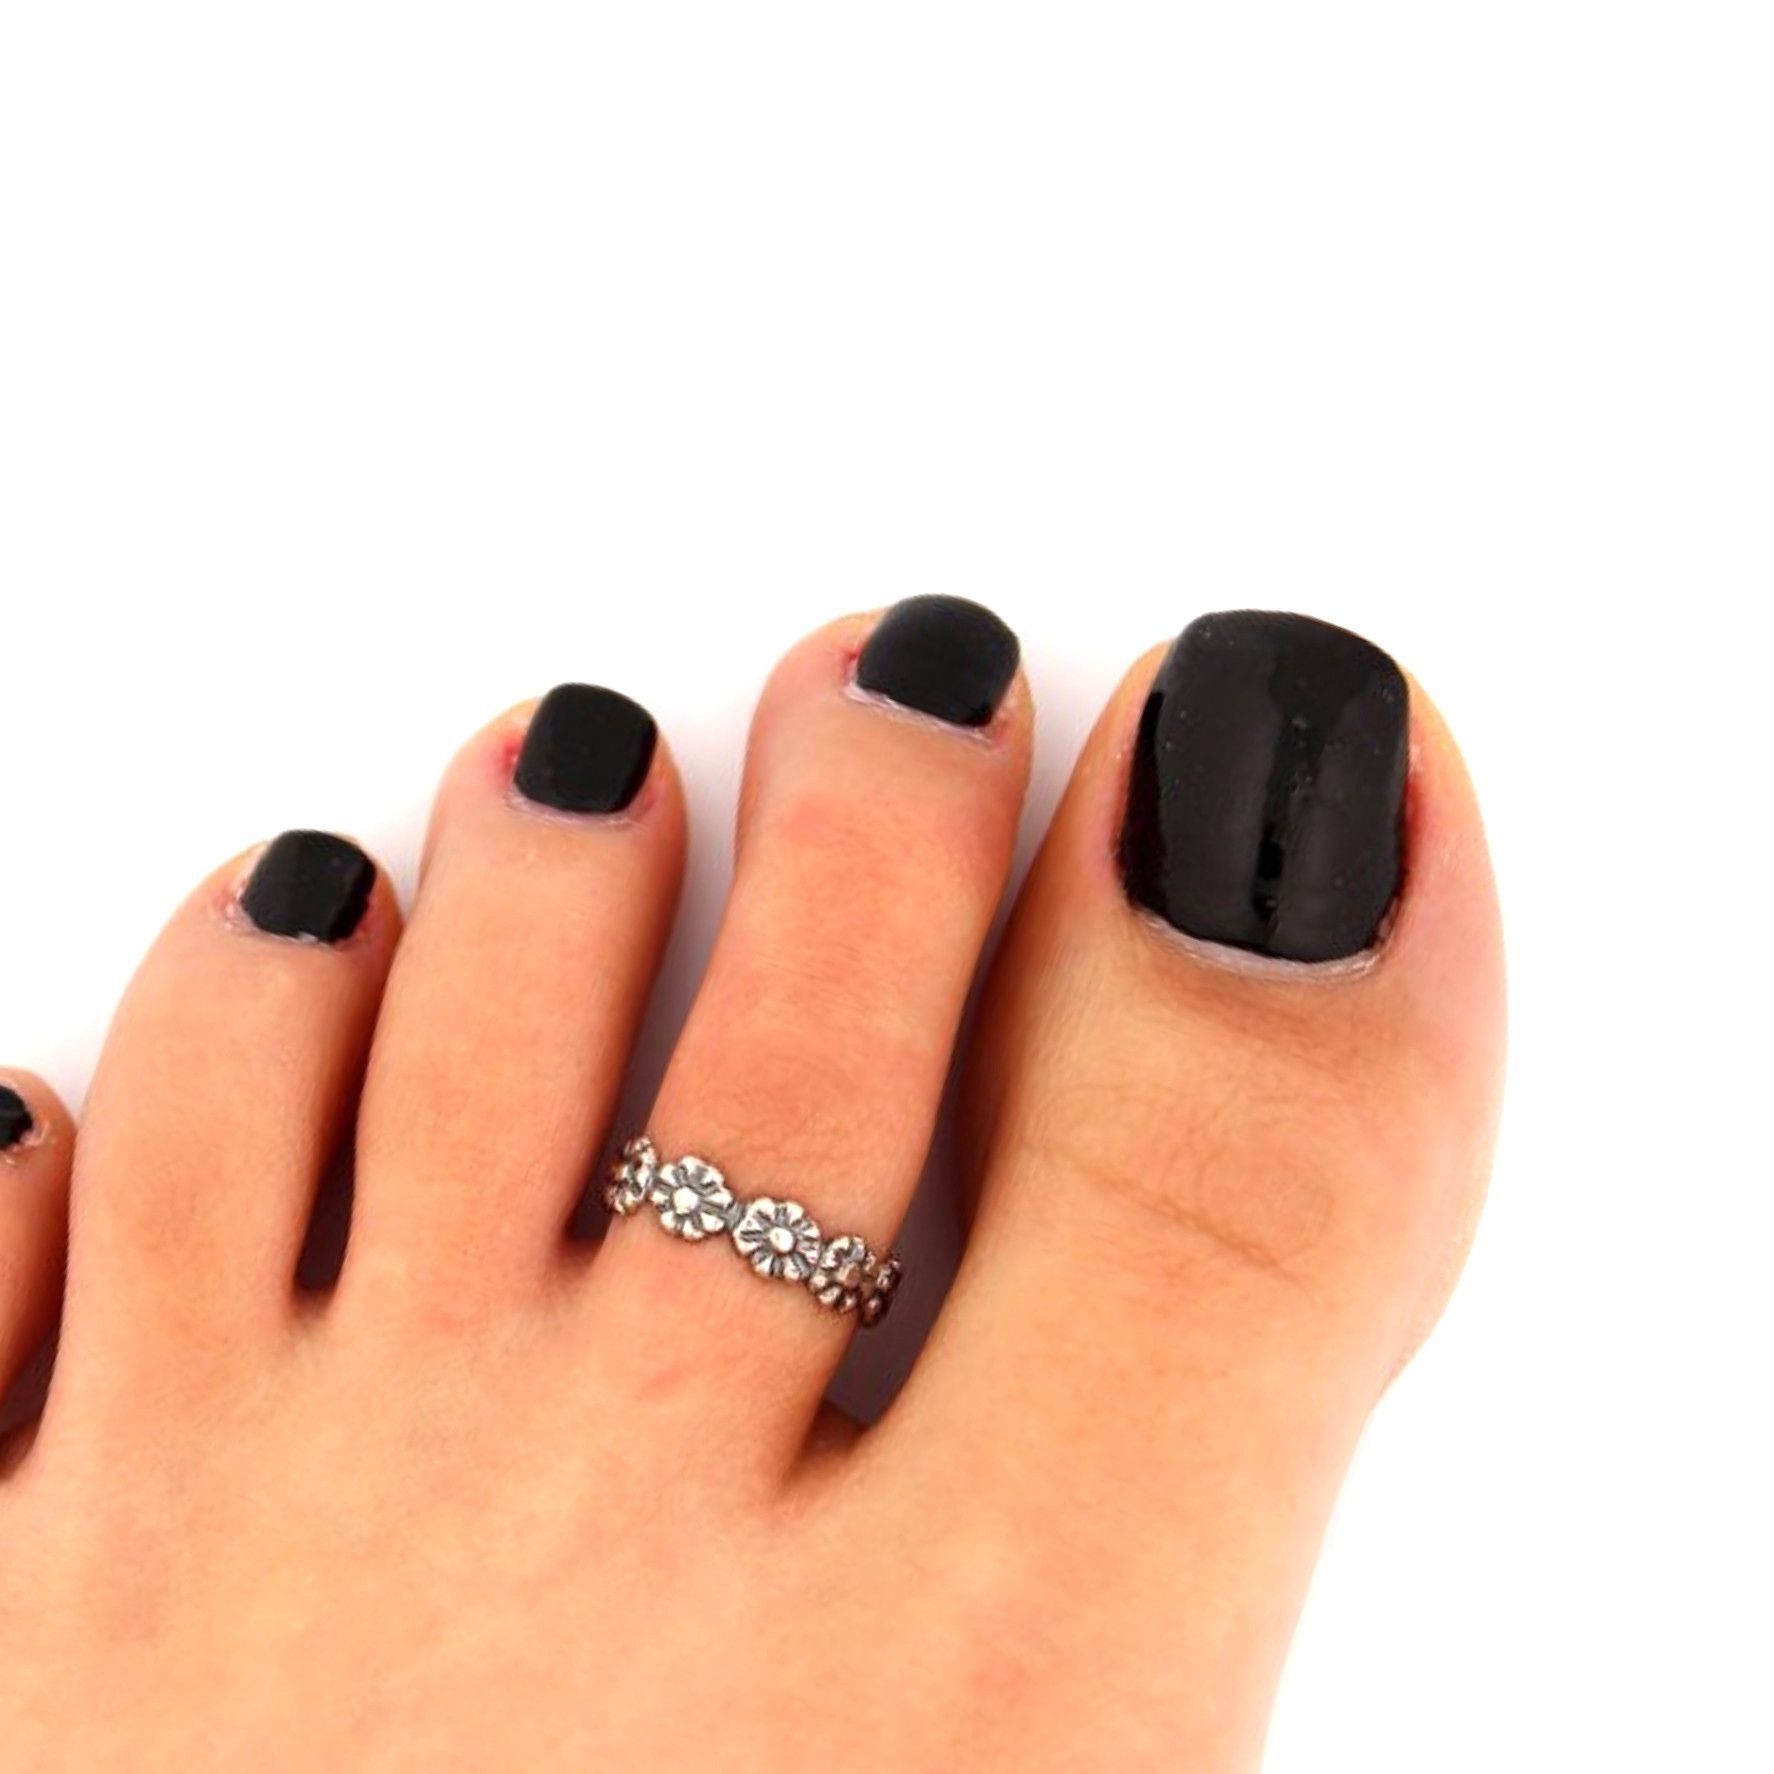 Shopping For Toe Rings That Are Simple Yet Chic? This Silver Toe Pertaining To Recent Non Adjustable Sterling Silver Toe Rings (View 4 of 15)